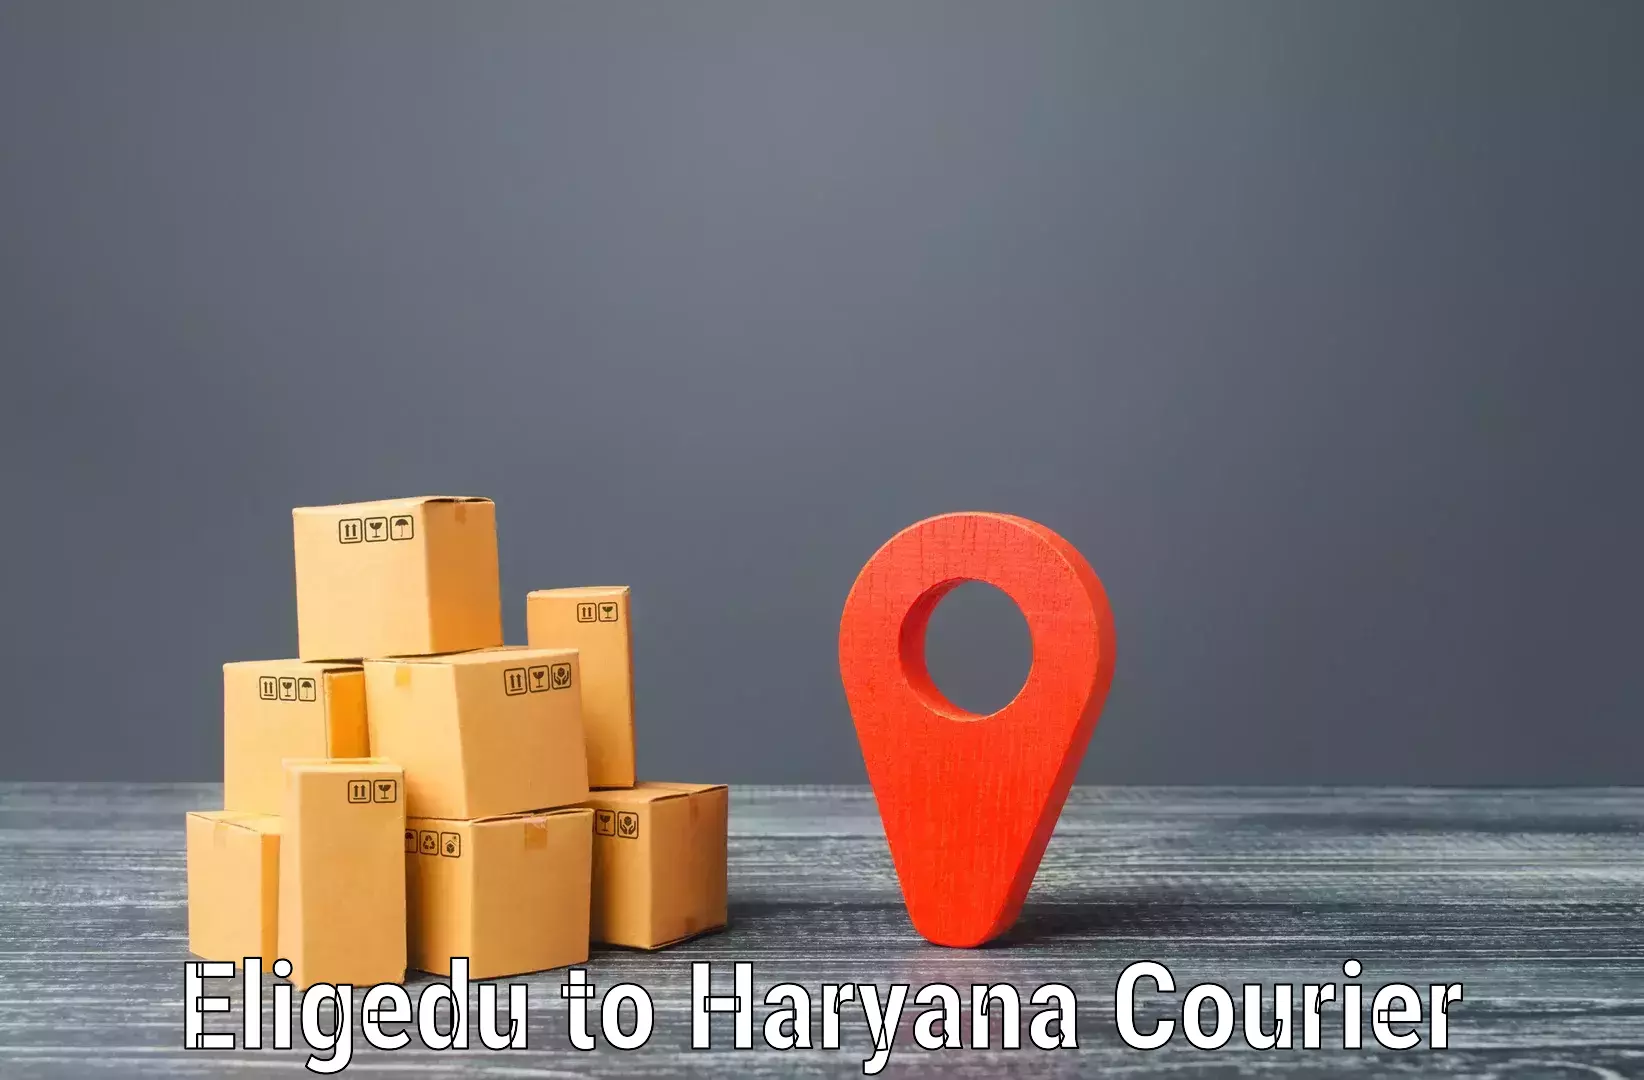 Round-the-clock parcel delivery Eligedu to Sohna